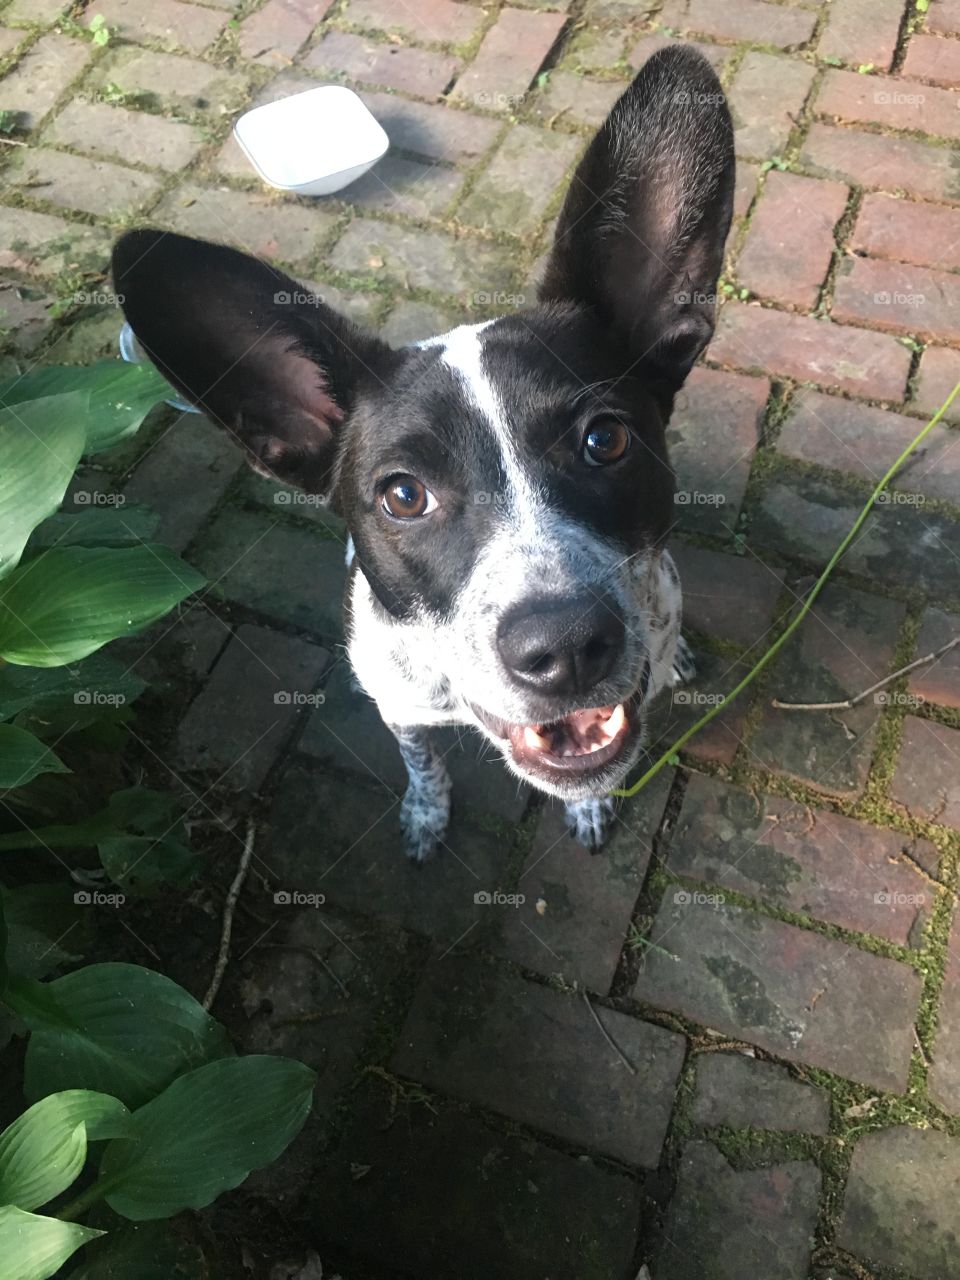 Small dog with big brown eyes and big black ears standing straight up looking eagerly at the camera, sitting on a brick patio with green leaves to the left side.